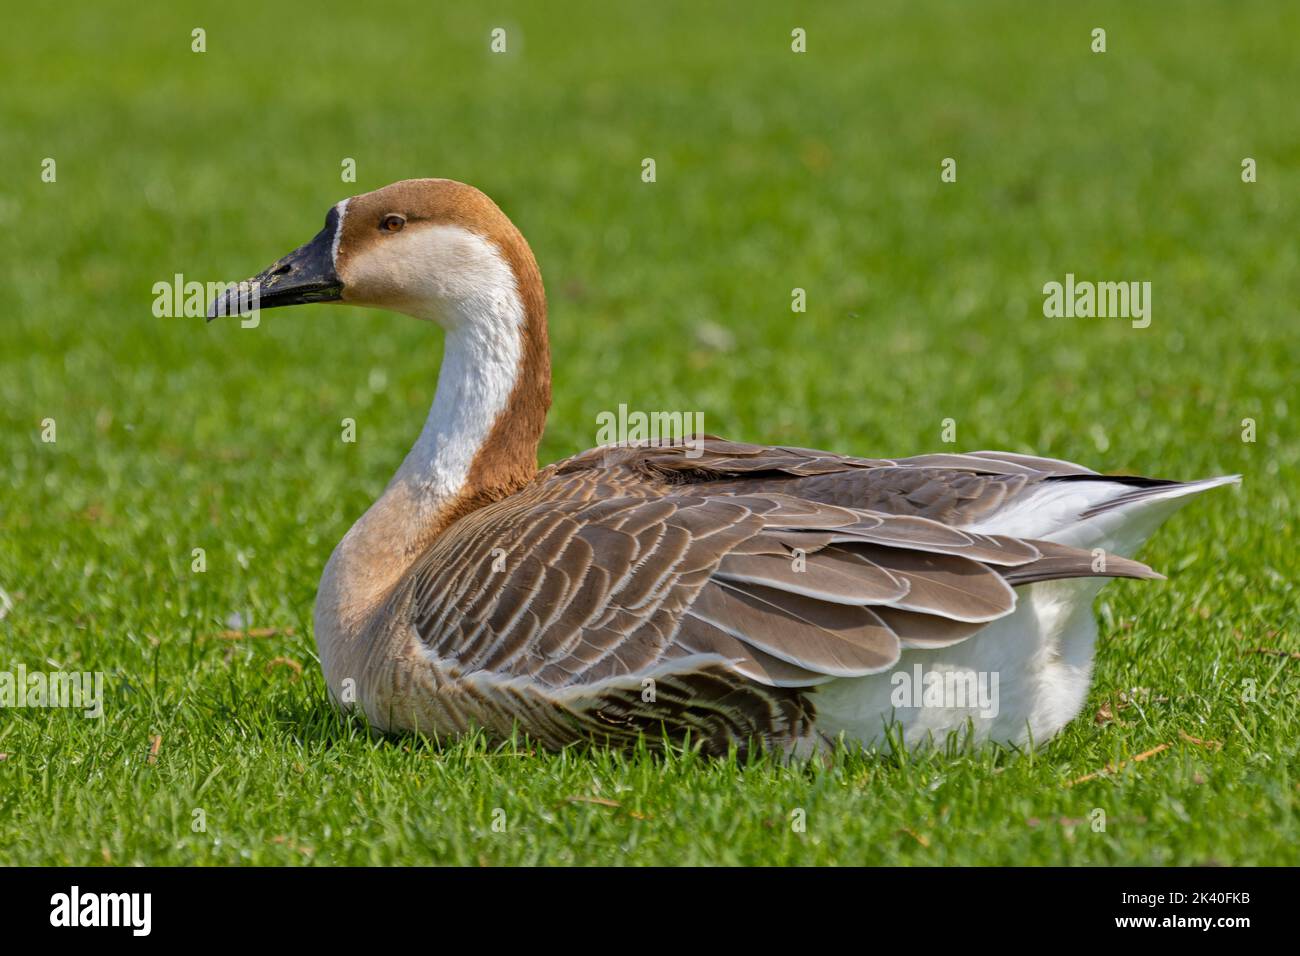 Swan Goose, Brown African Goose (Anser cygnoides), on a lawn at Neckar, Germany, Baden-Wuerttemberg, Heidelberg Stock Photo